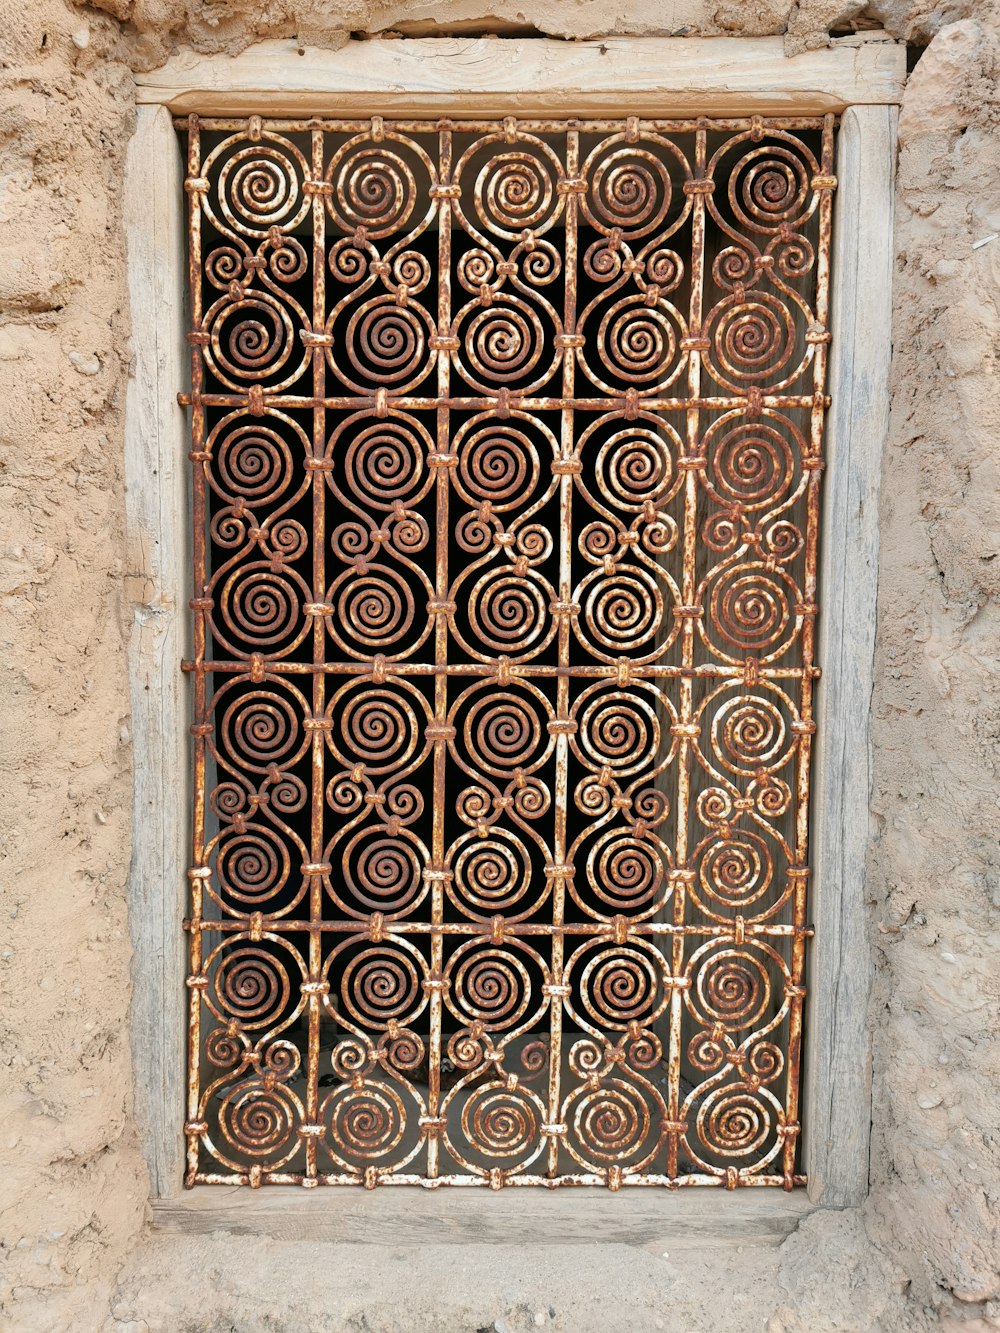 a window with a metal grate on a stone wall